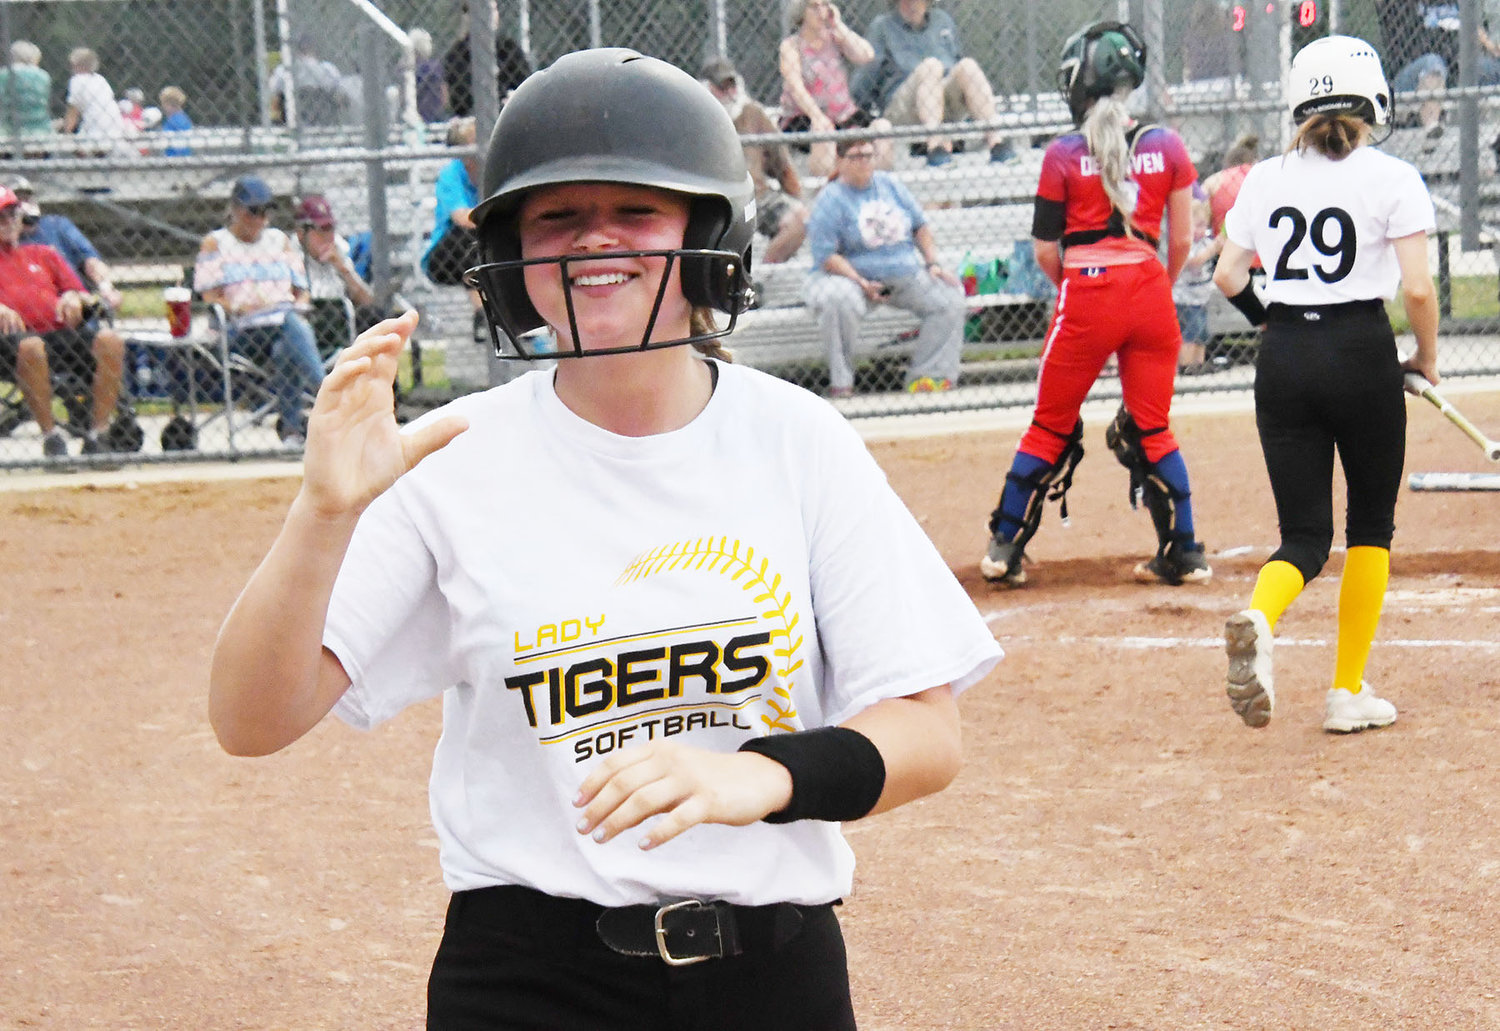 Maddie Seidel of Higbee smiles after scoring a run. Runs came at a premium, with only seven of them in the five-inning game.